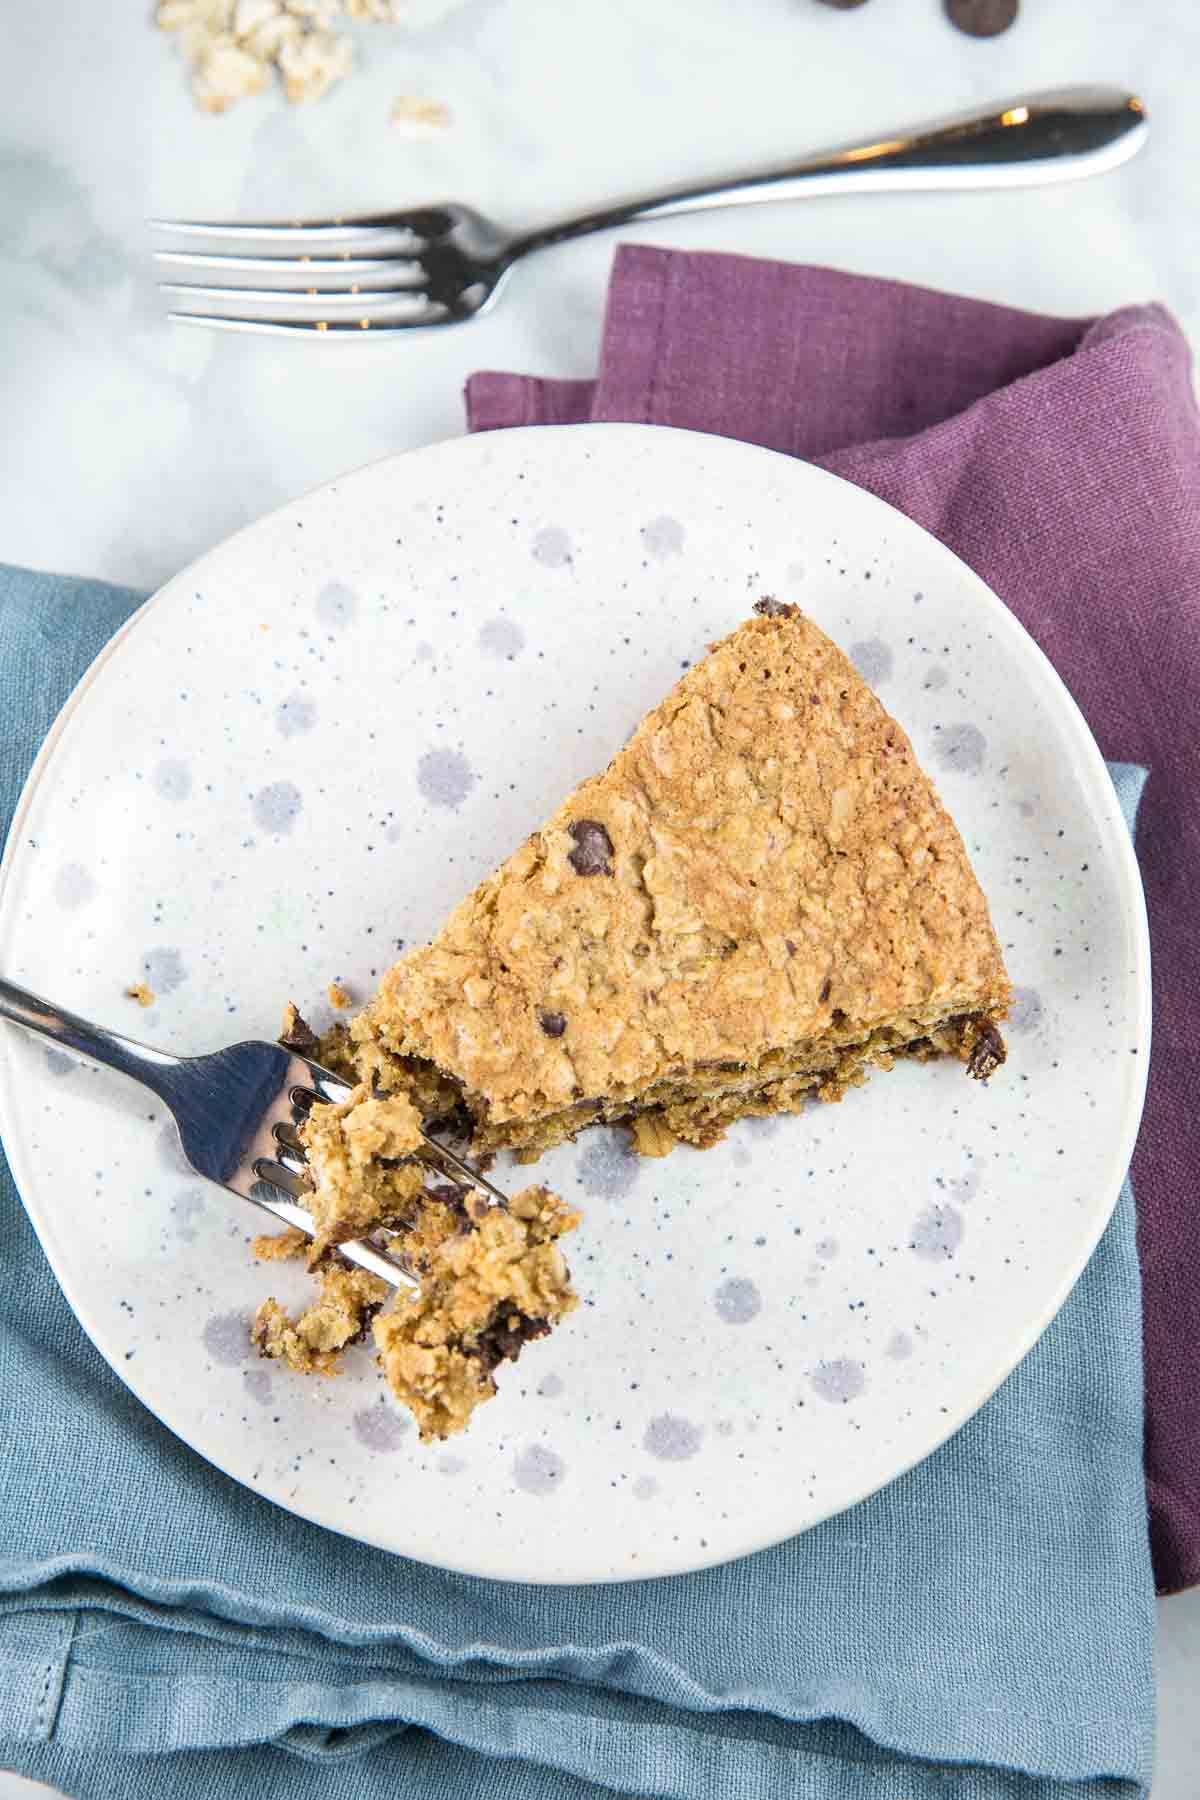 Giant Oatmeal Chocolate Chip Cookie: crispy and firm on the outside and soft and chewy in the center, this giant cookie/cookie cake is the perfect crowd pleasing dessert to share! {Bunsen Burner Bakery} #cookie #oatmealchocolatechip #giantcookie #cookiecake